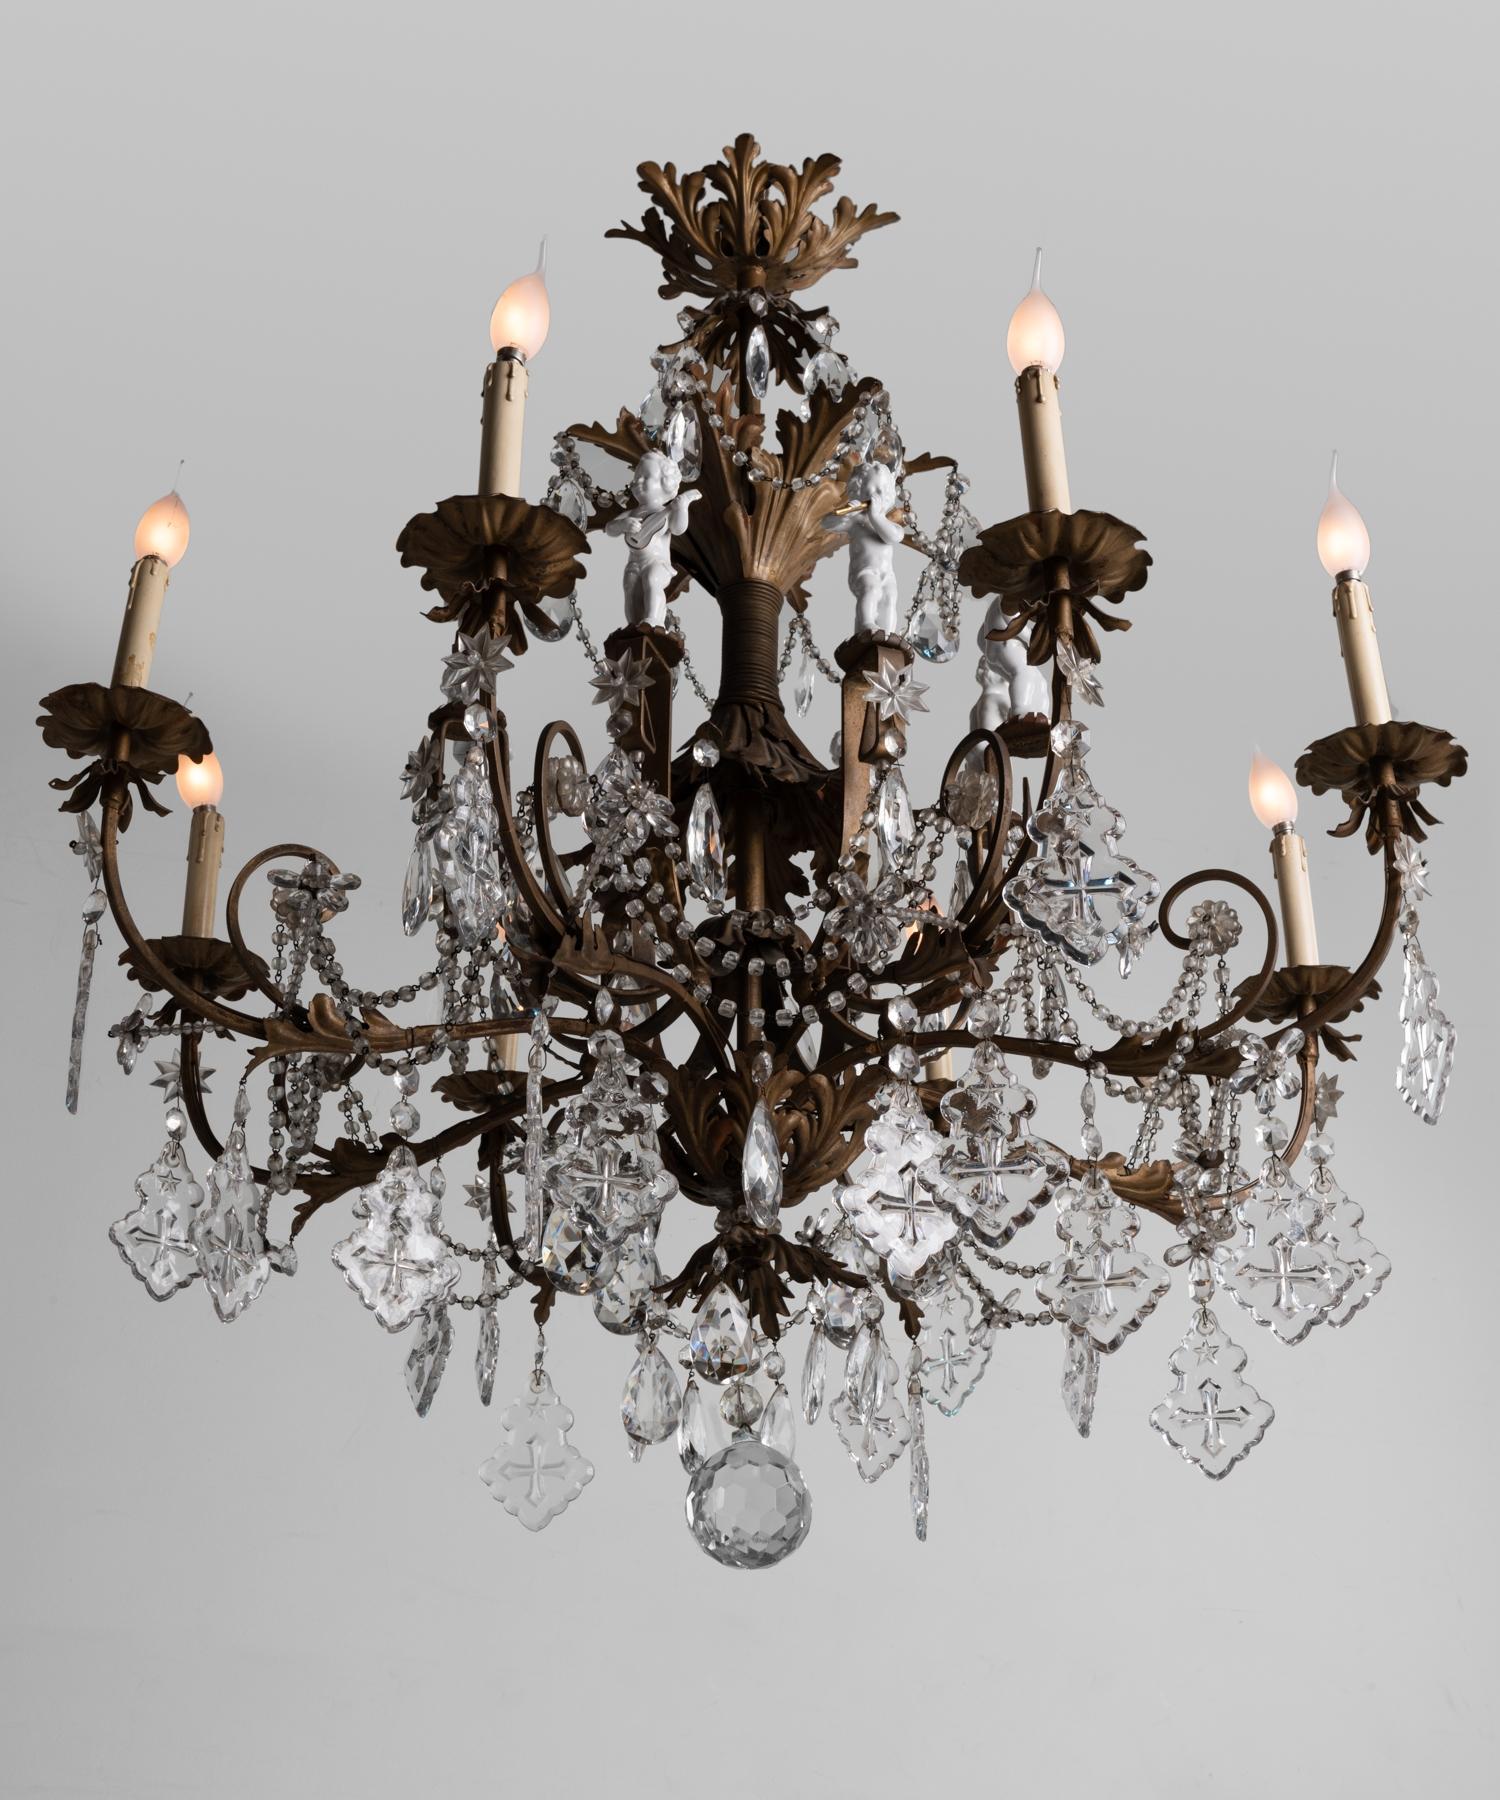 Italian Ornate Brass Chandelier with Porcelain Figures, Italy, circa 1920